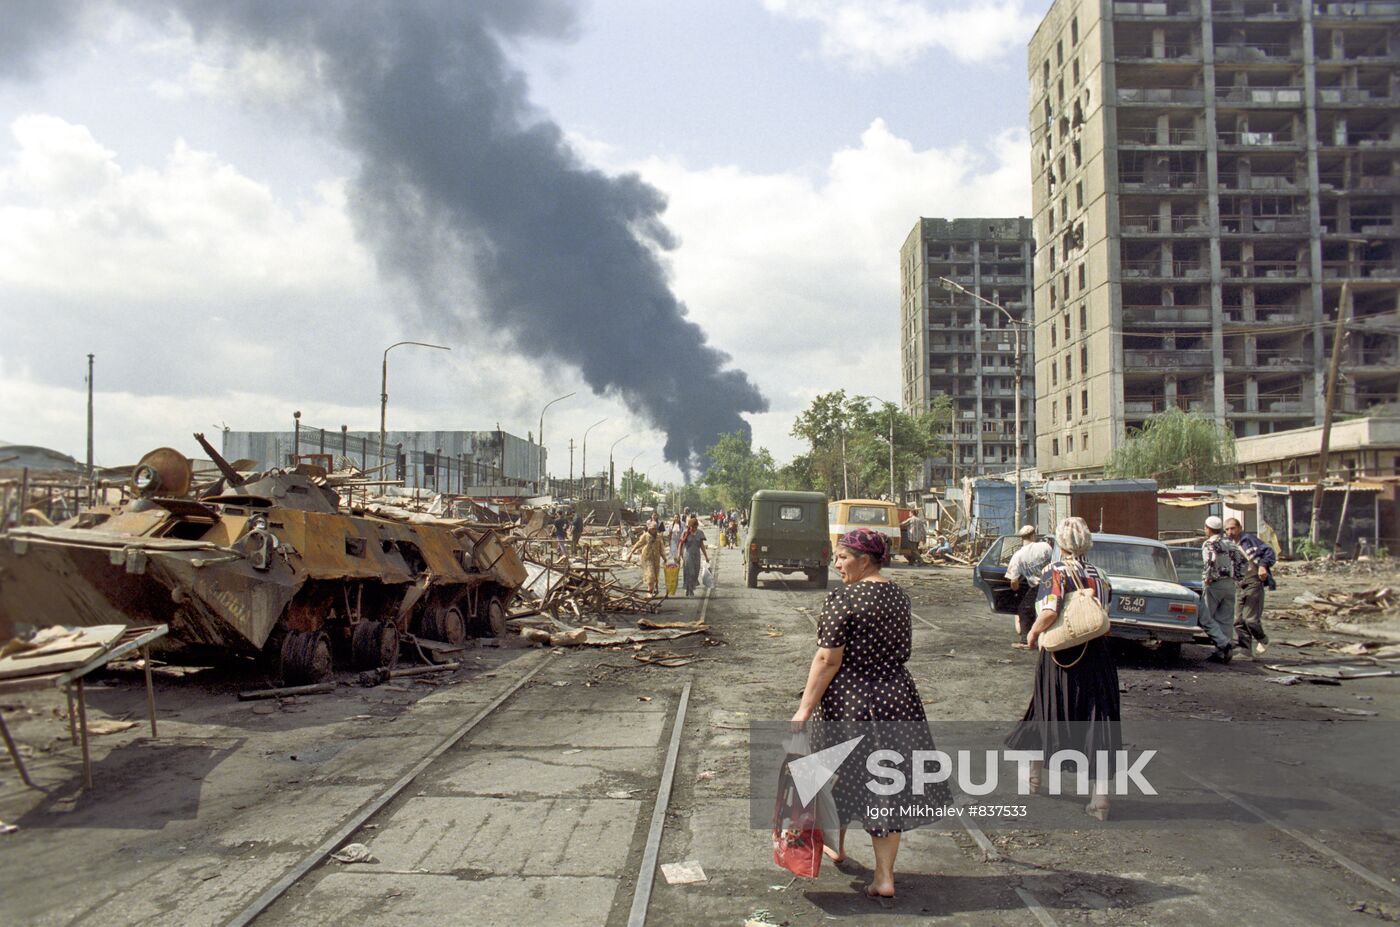 In the streets of Grozny after hostilities